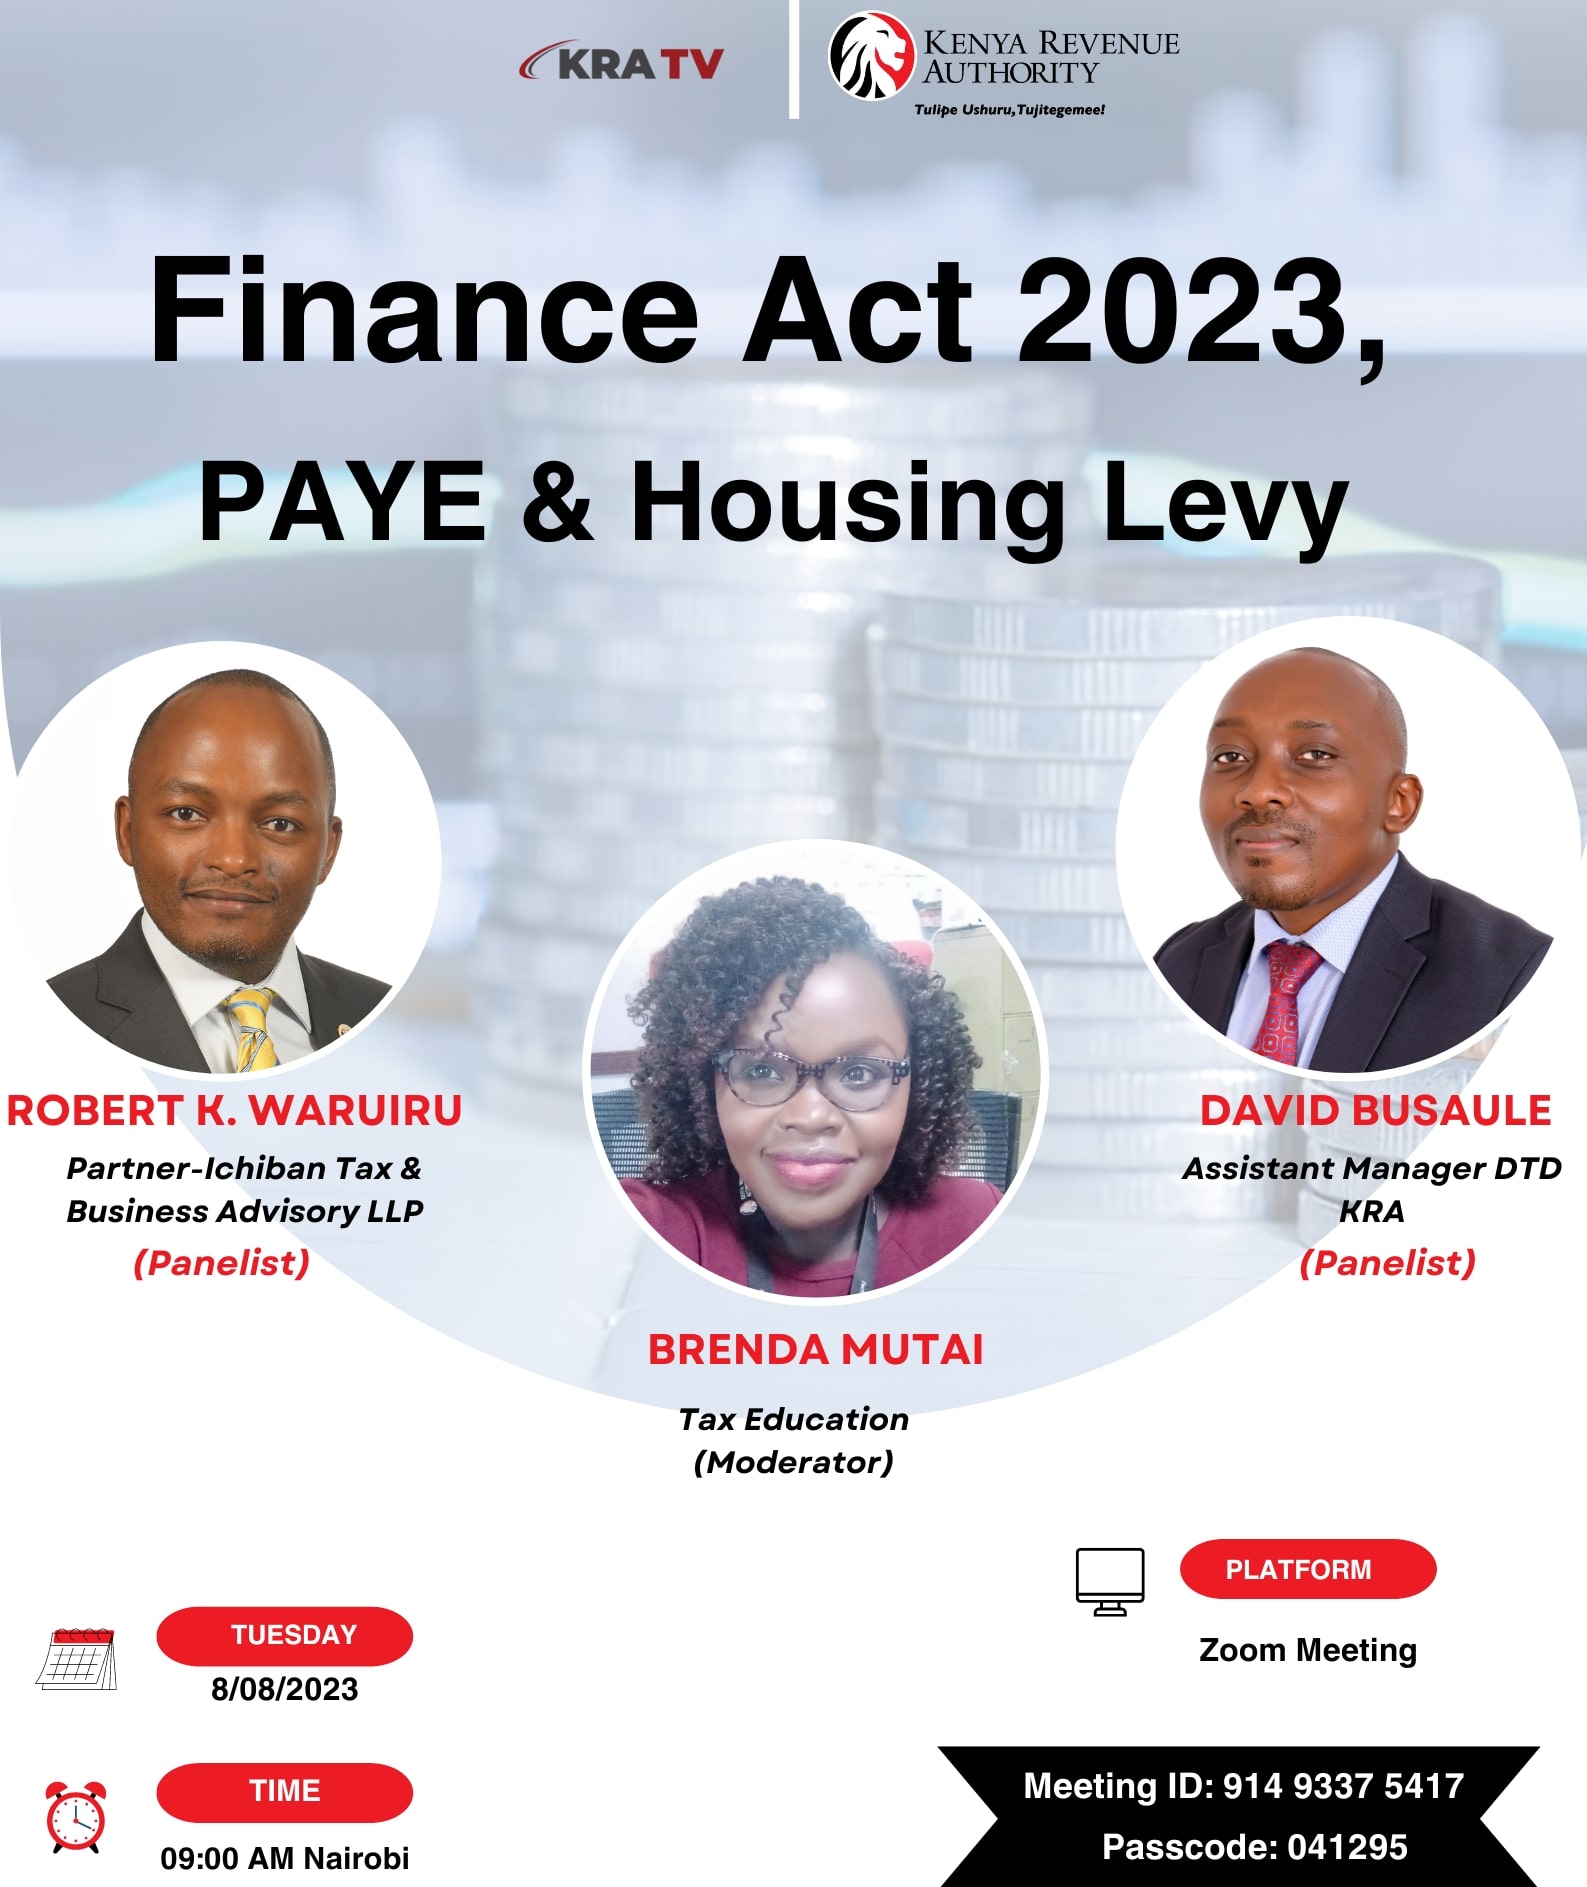 Finance Act  2023, discussing PAYE, Housing Levy